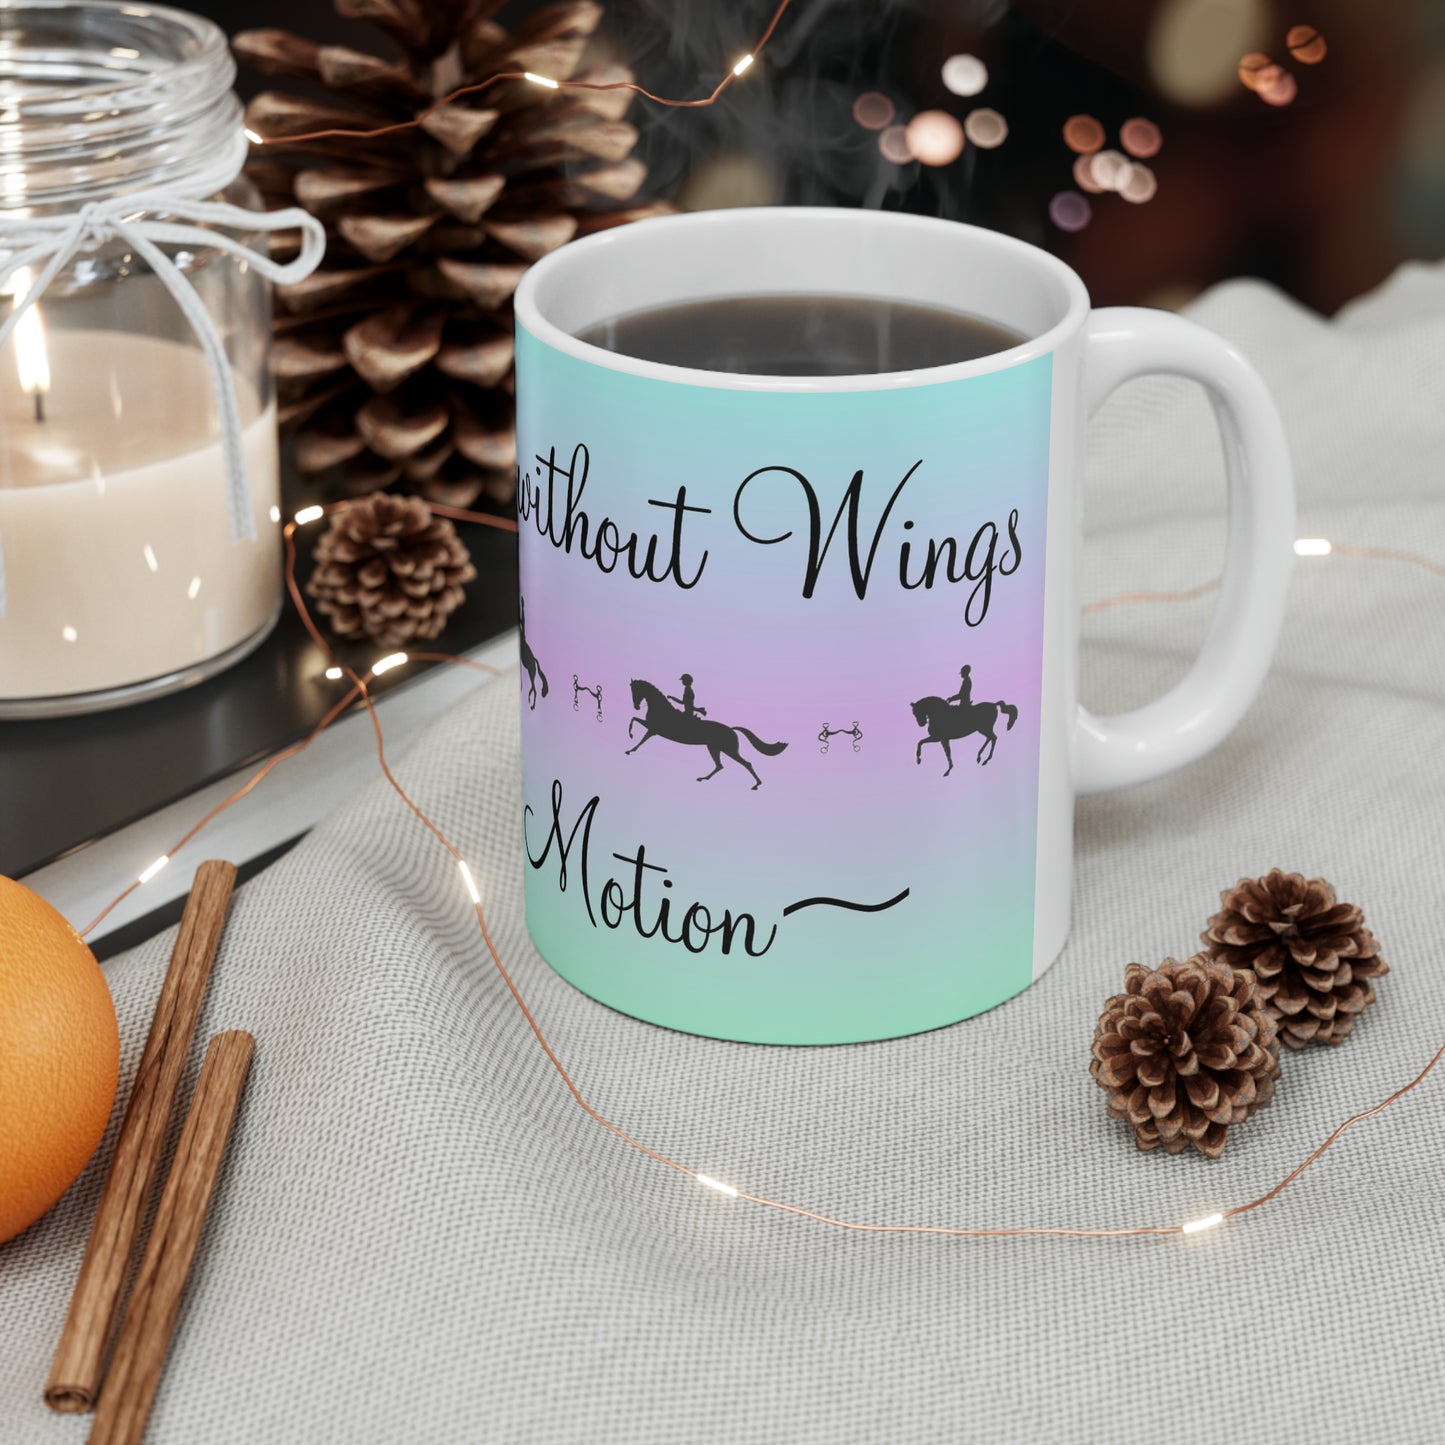 J5035 Mug Ceramic 11oz-Horse-Dressage-Inspirational-Riding is Flight without Wings~Poetry in Motion